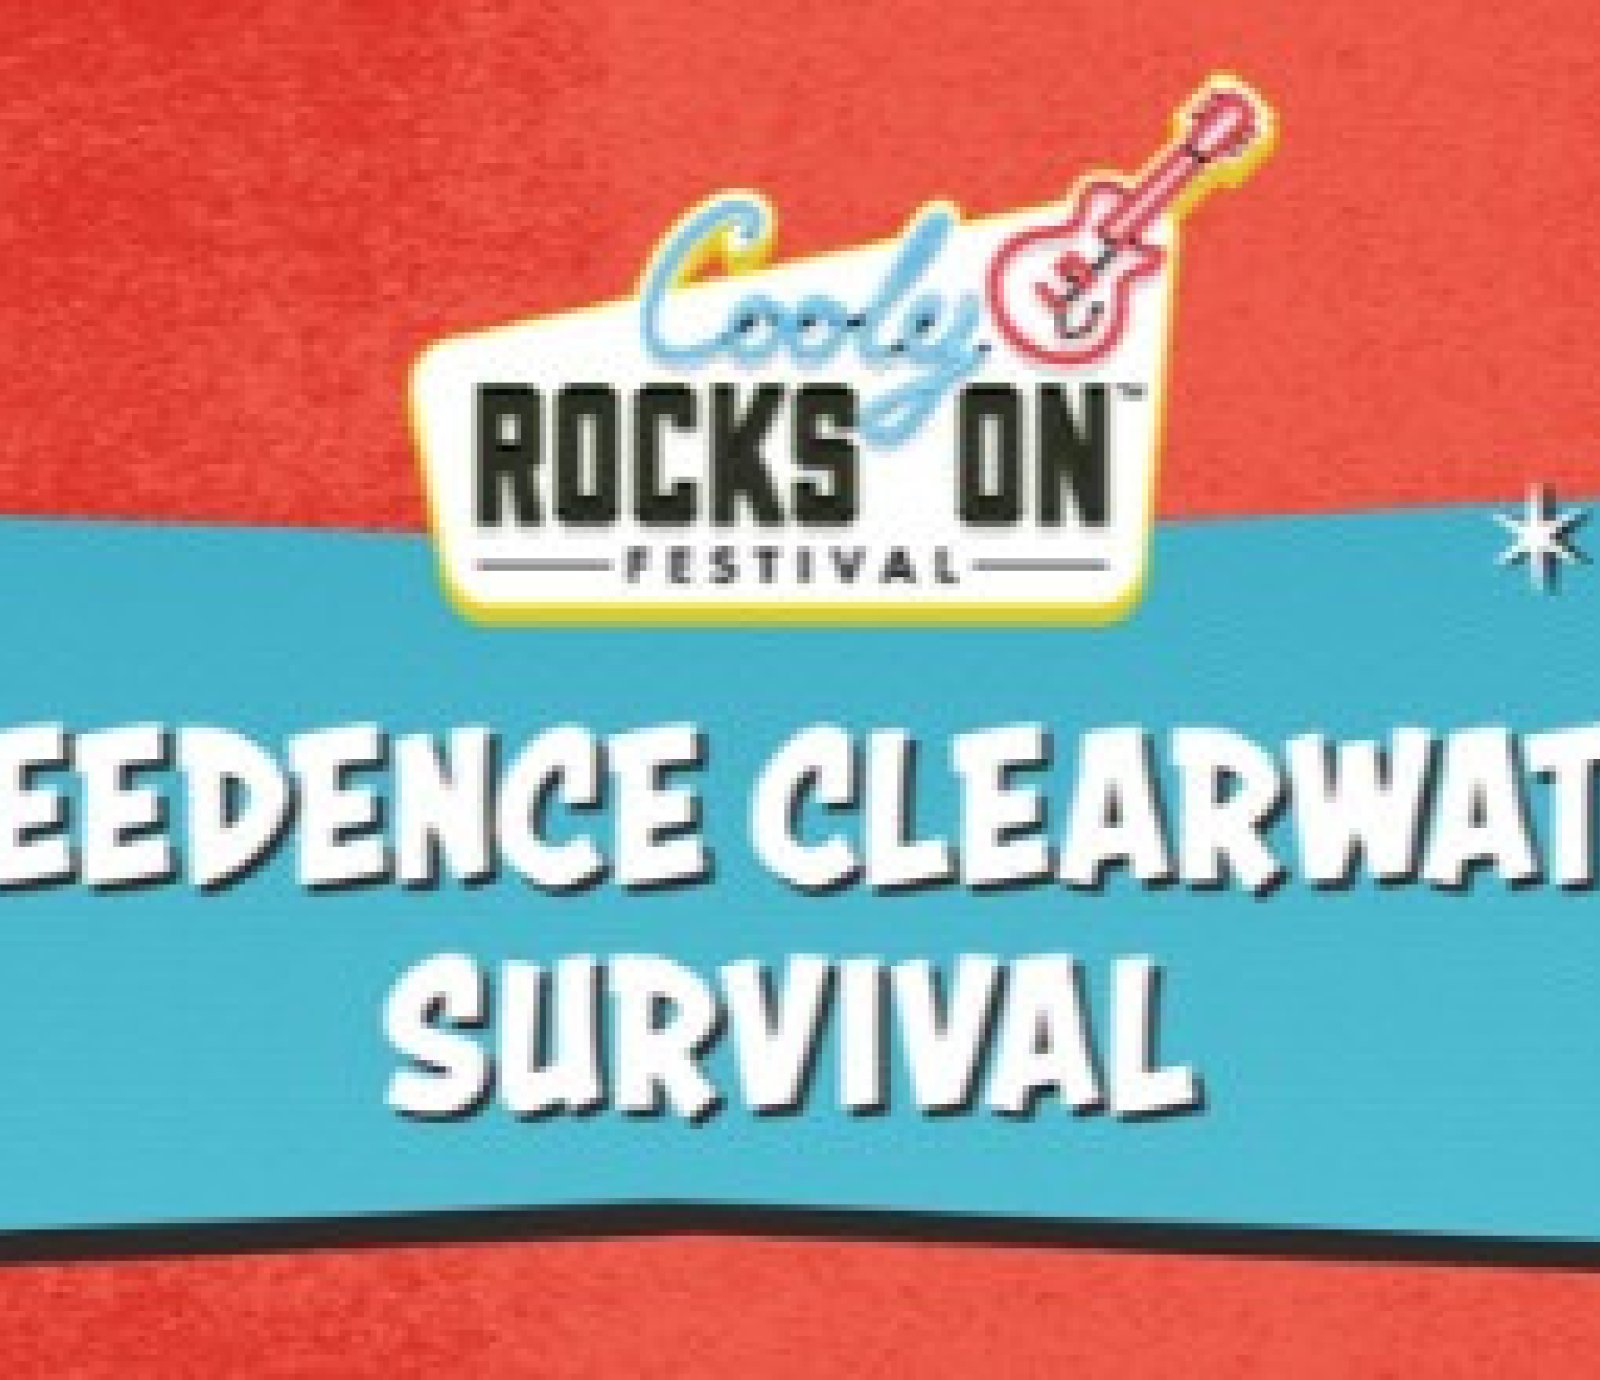 Creedence Clearwater Survival Show